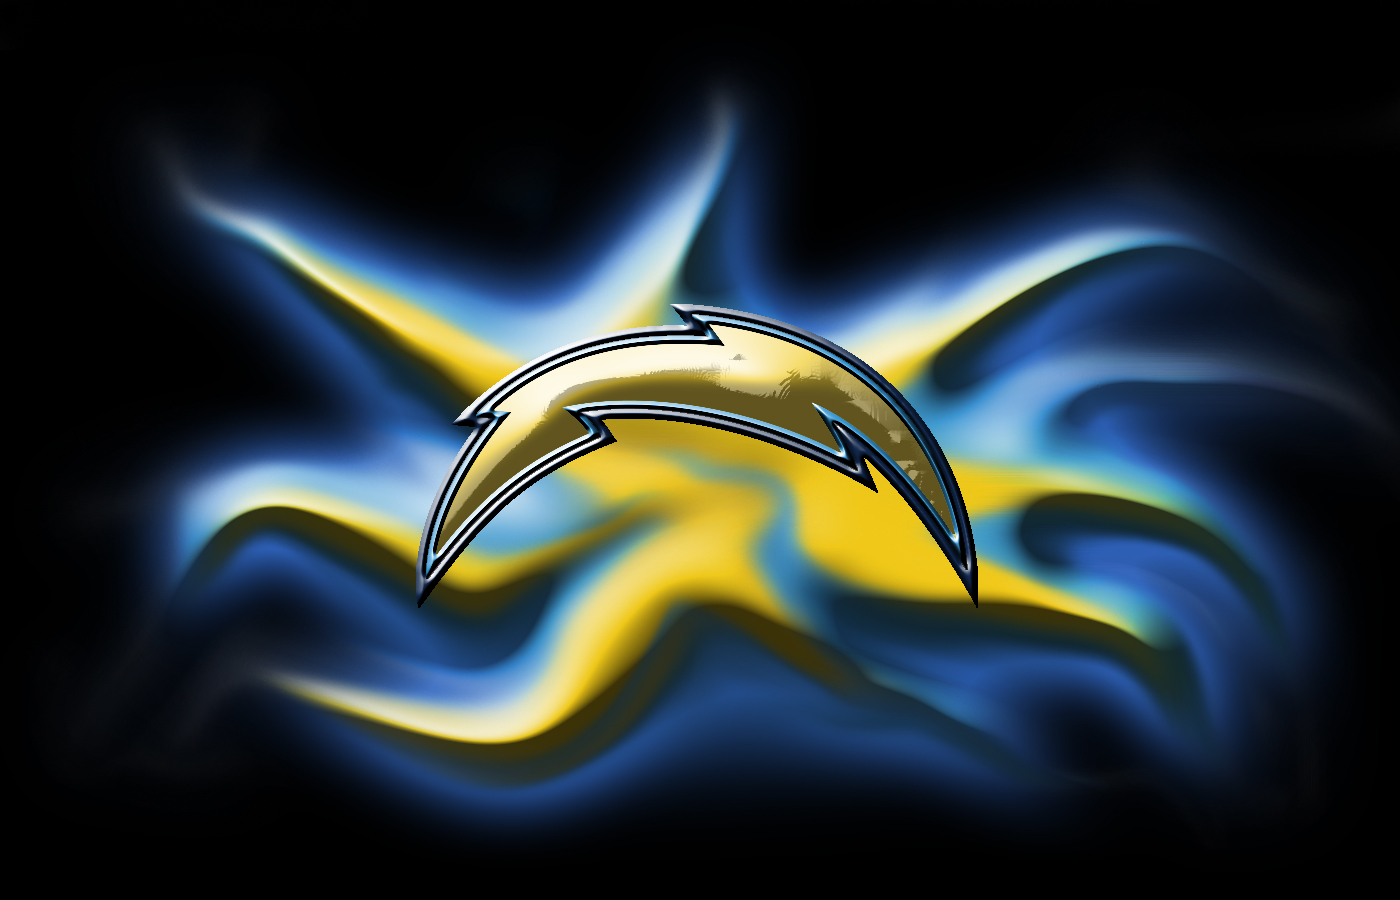 San Diego Chargers football team logo wallpaper click thumbnail to